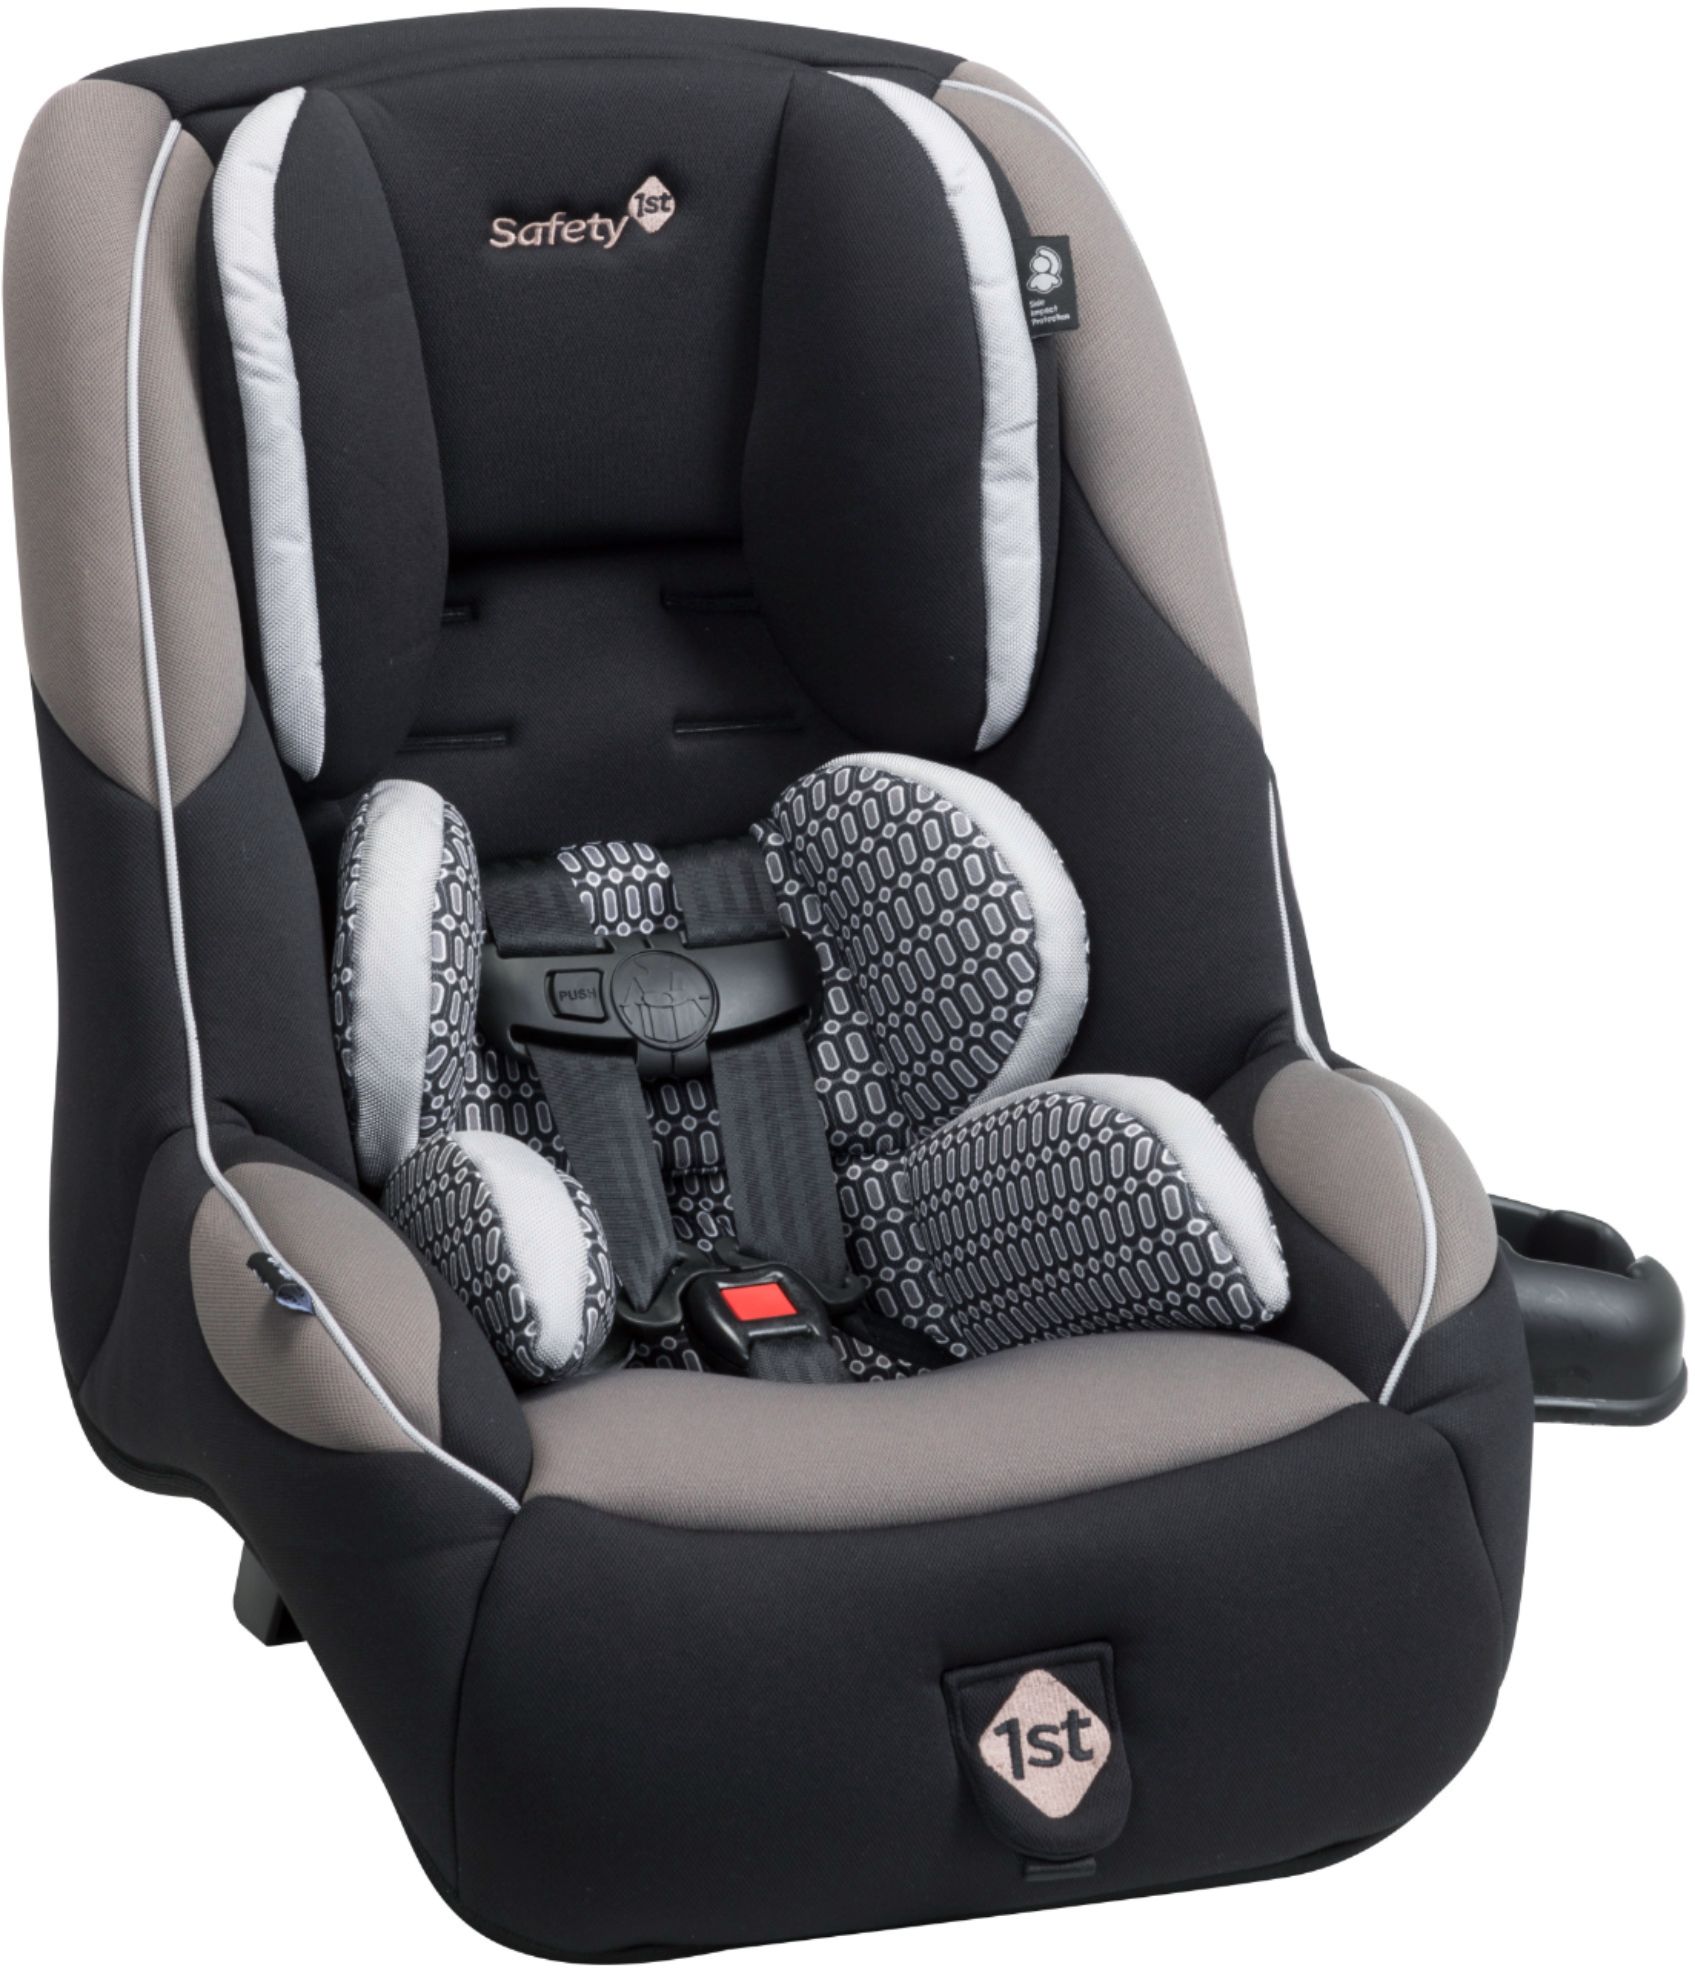  Safety 1st Guide 65 Convertible Car Seat Grey CC078CMIA 